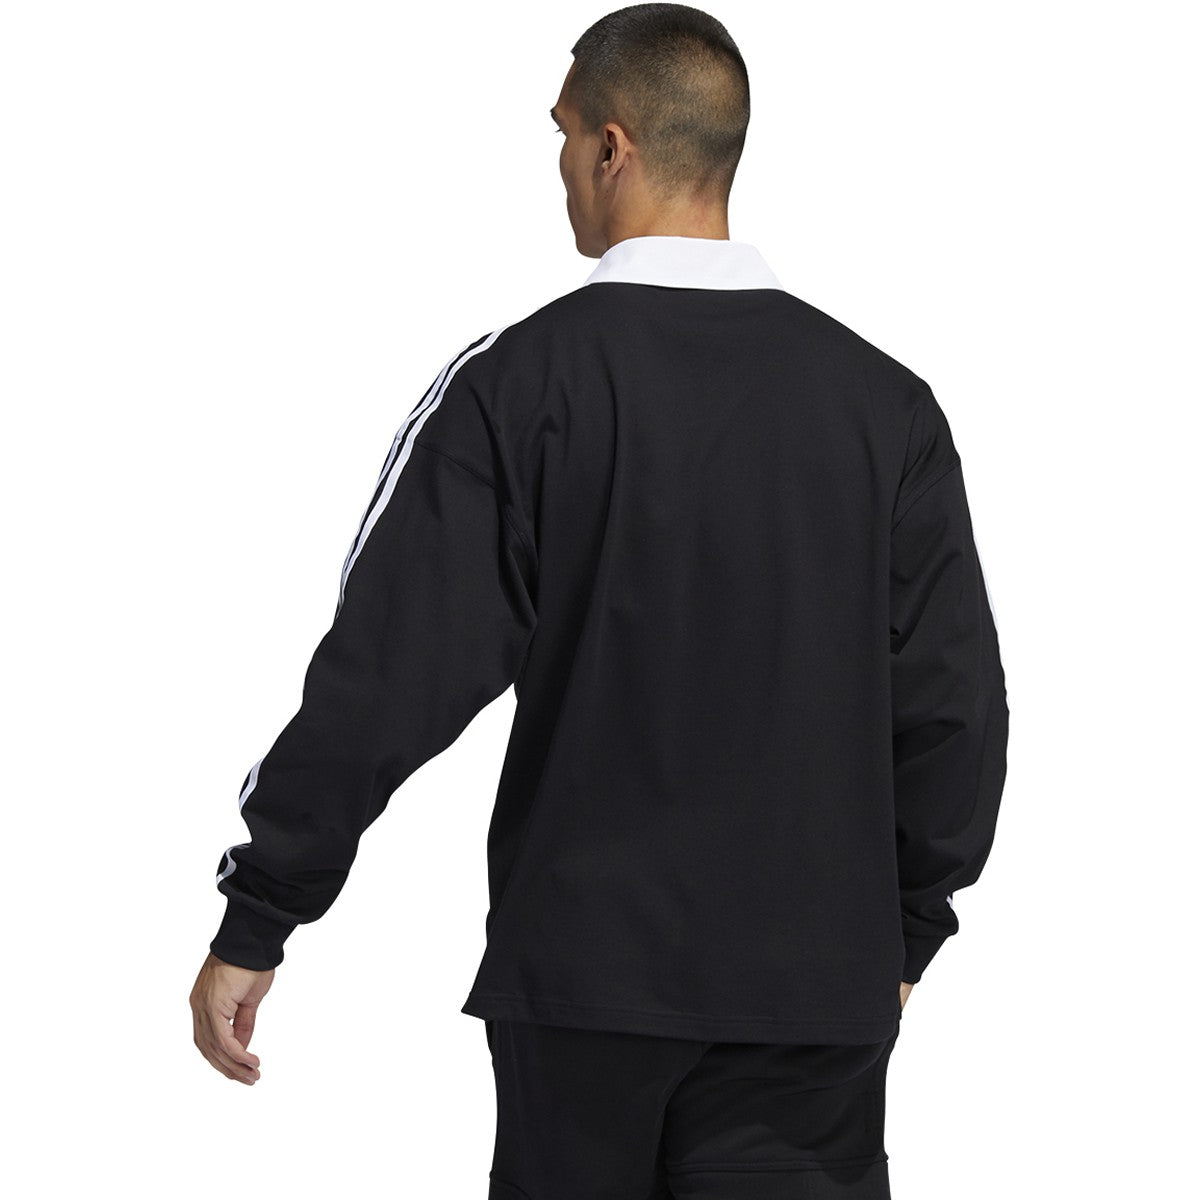 Black/White Adidas Solid Rugby Shirt Back